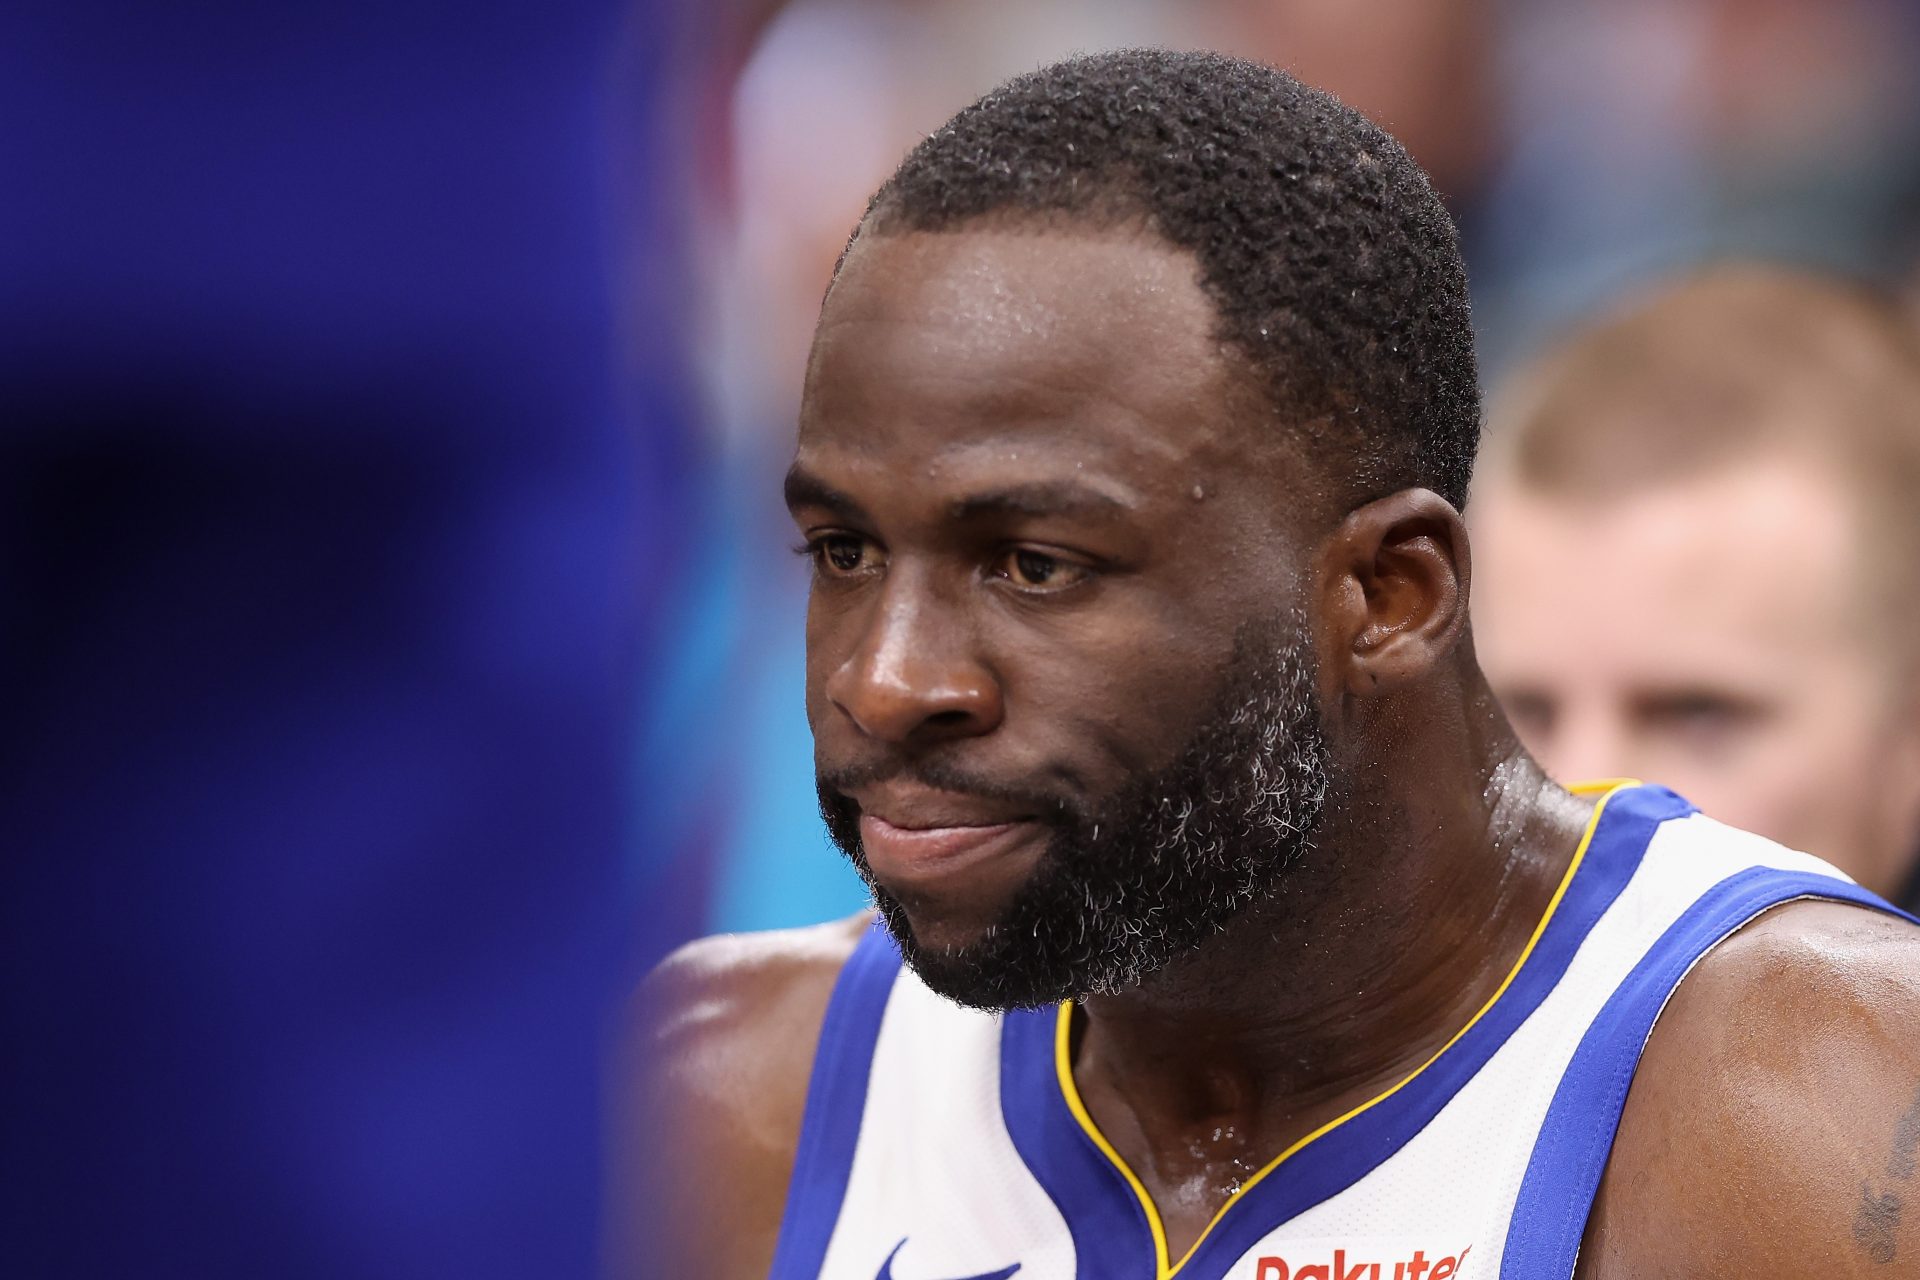 Is Draymond Green’s NBA career over after copping indefinite suspension from the league?